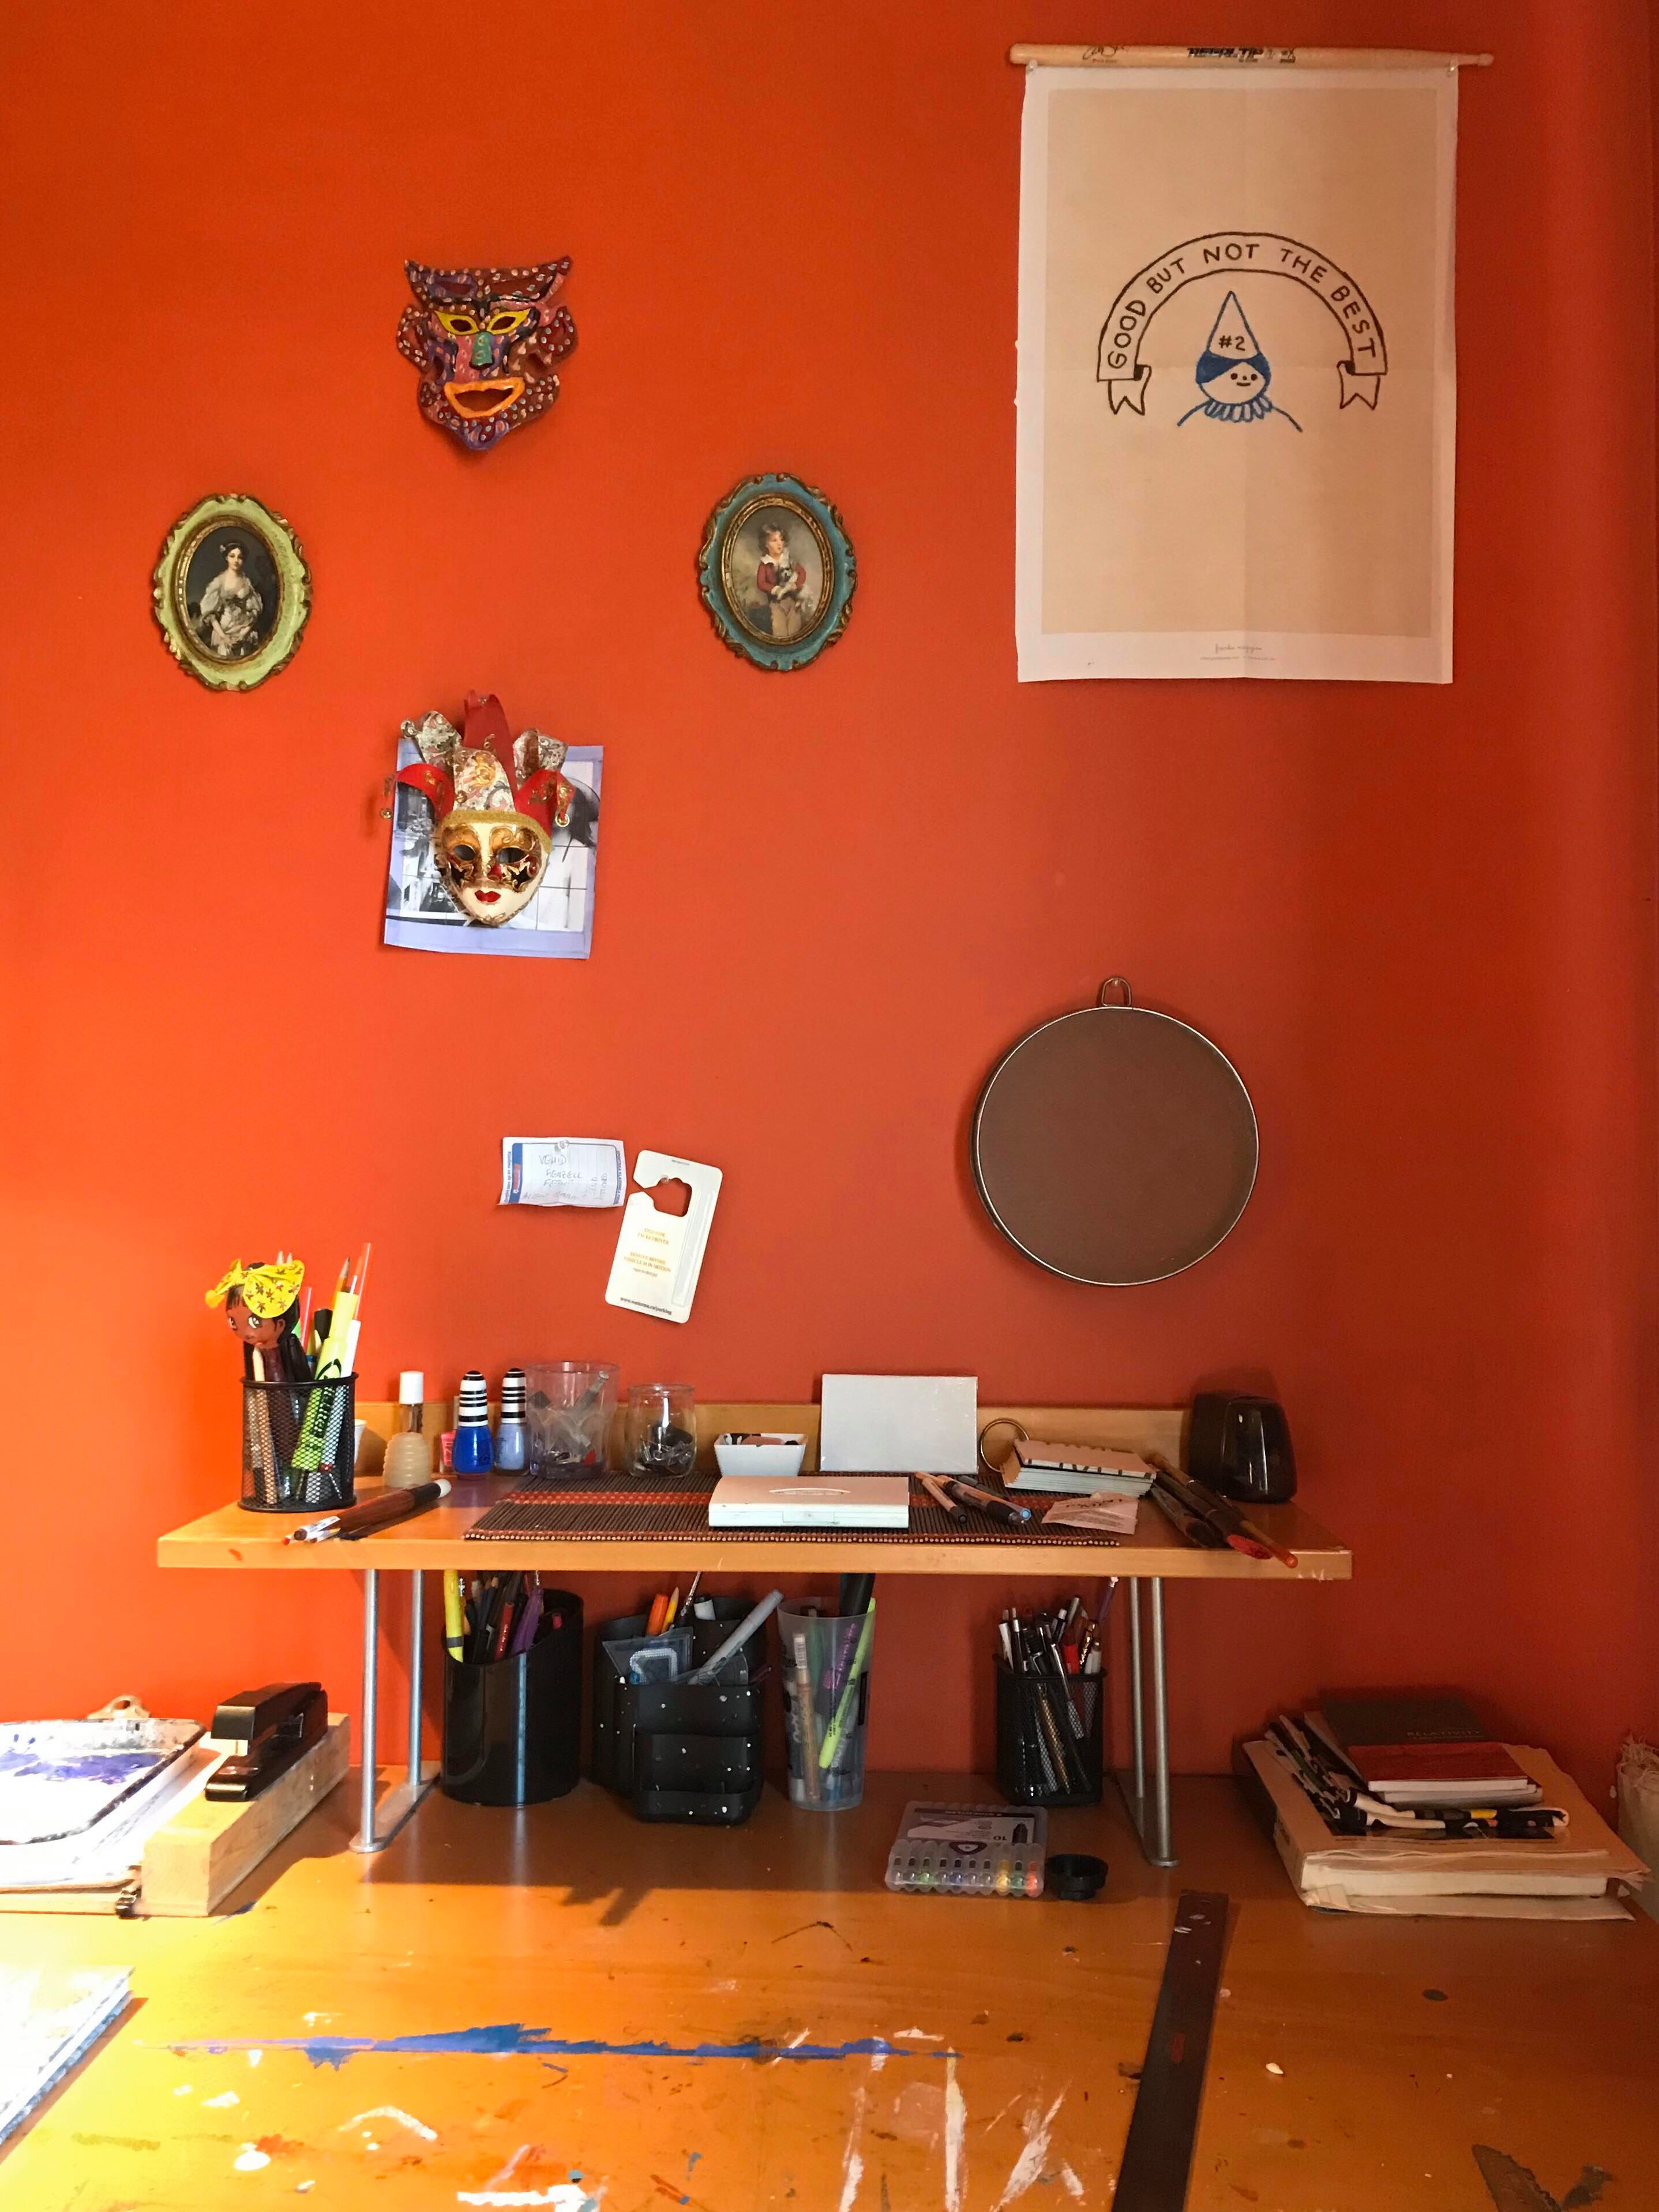 Photo of an orange studio space with art and curios hanging on the wall above a desk.